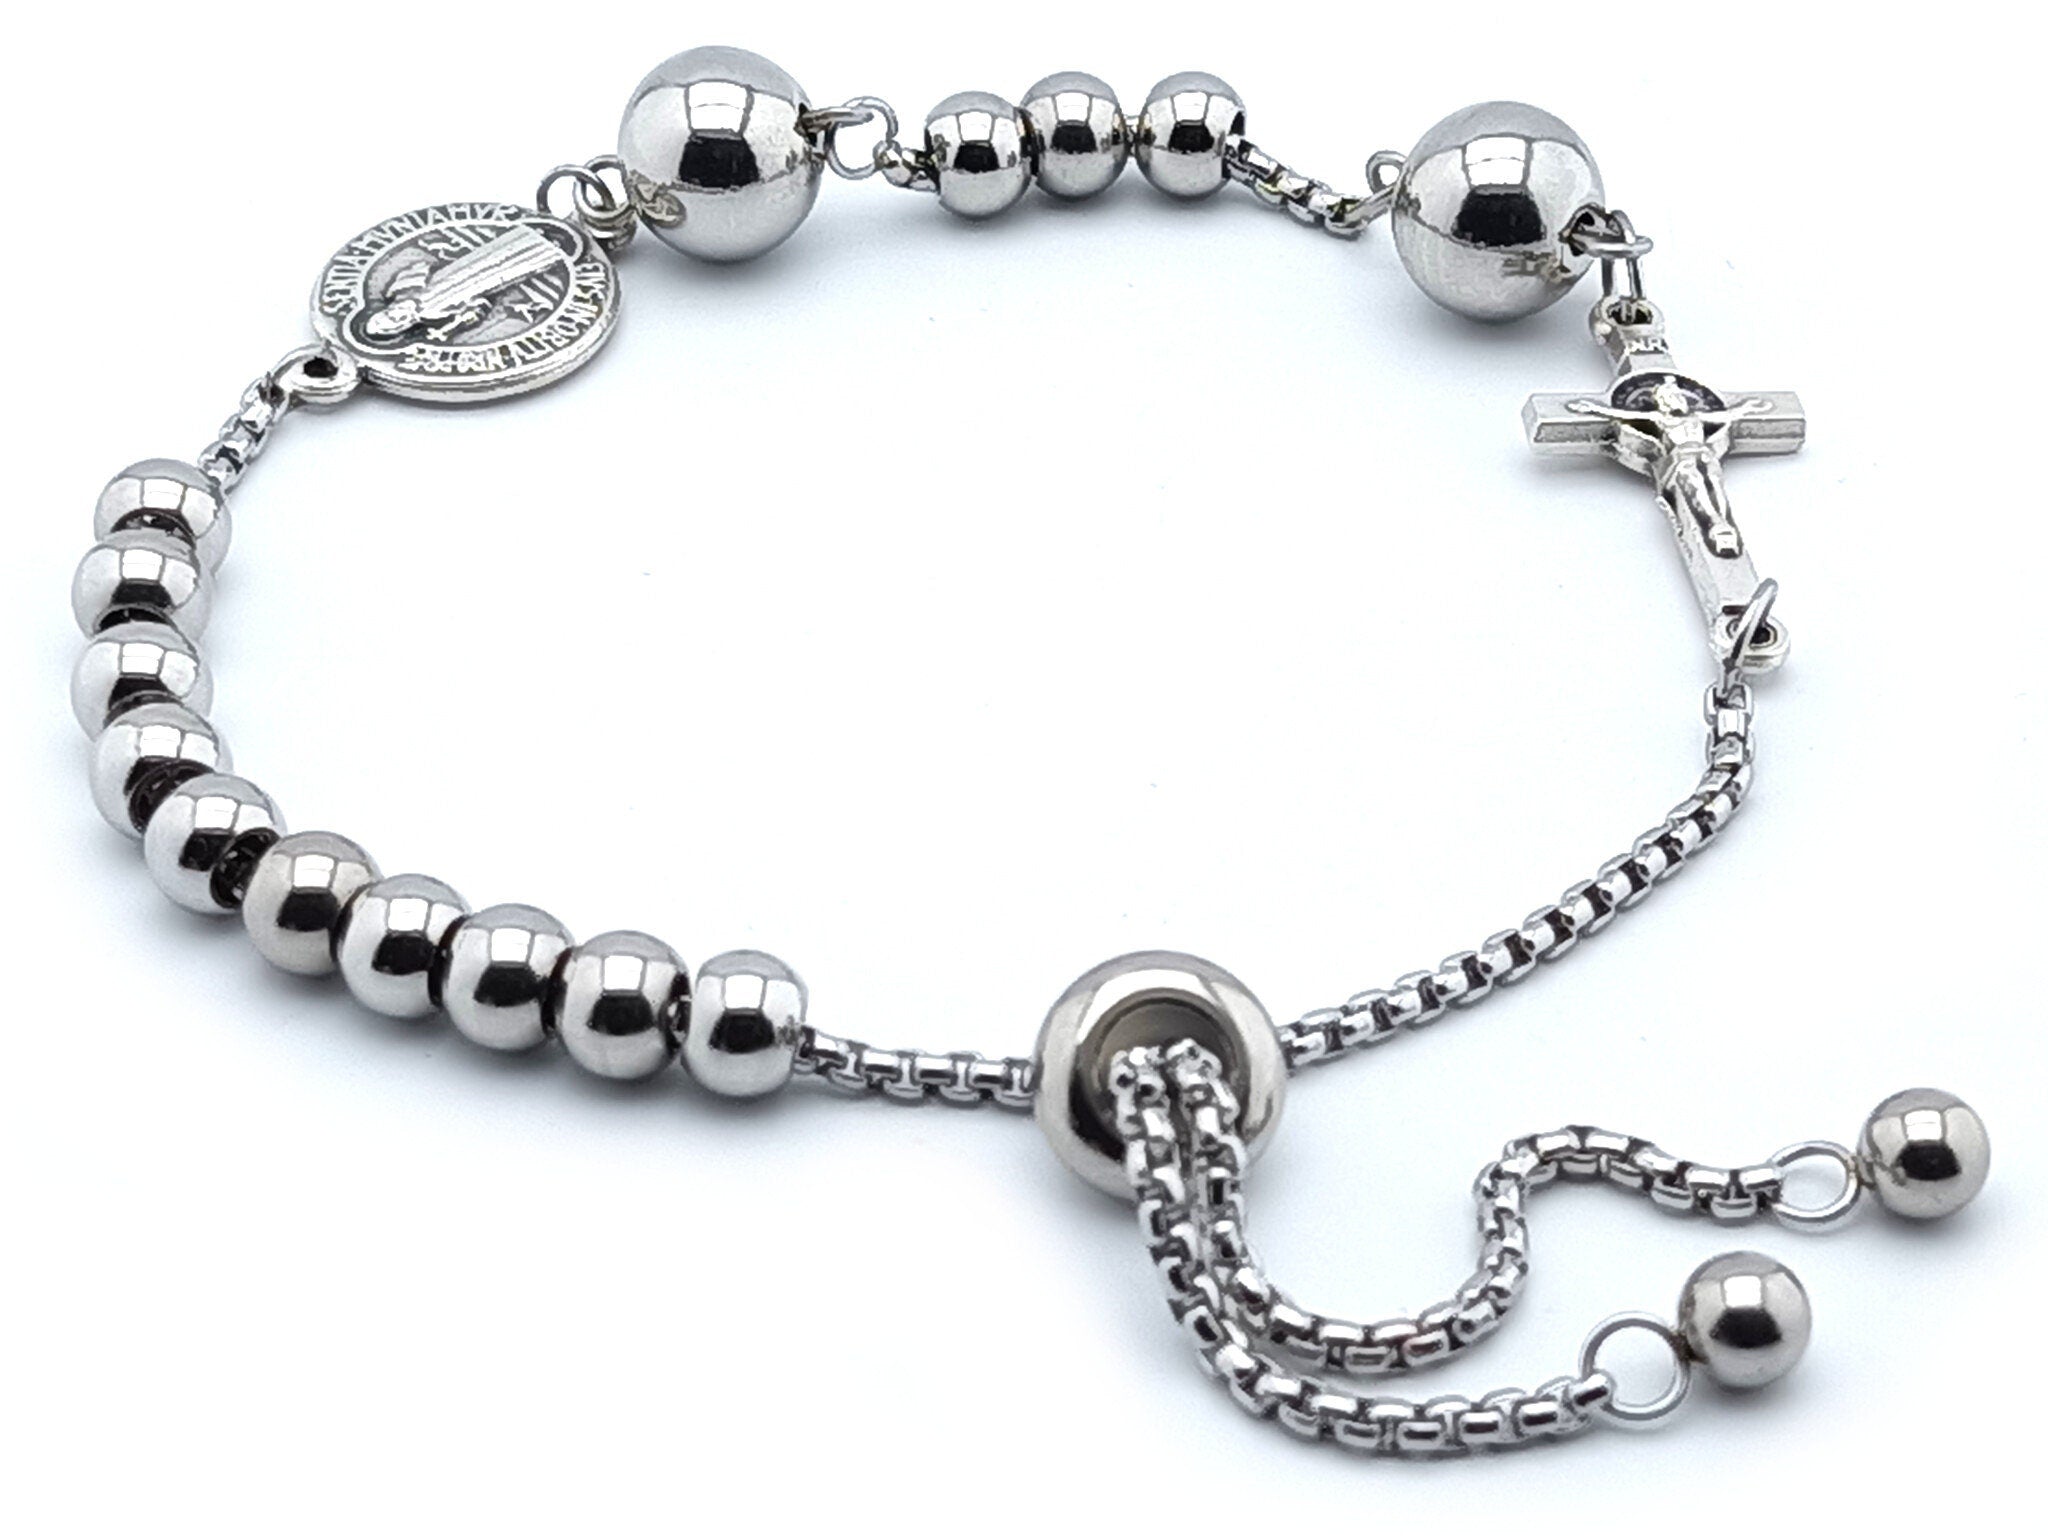 Solid Heart Shaped Sterling Silver Rosary Bracelet 8mm | HMH Religious